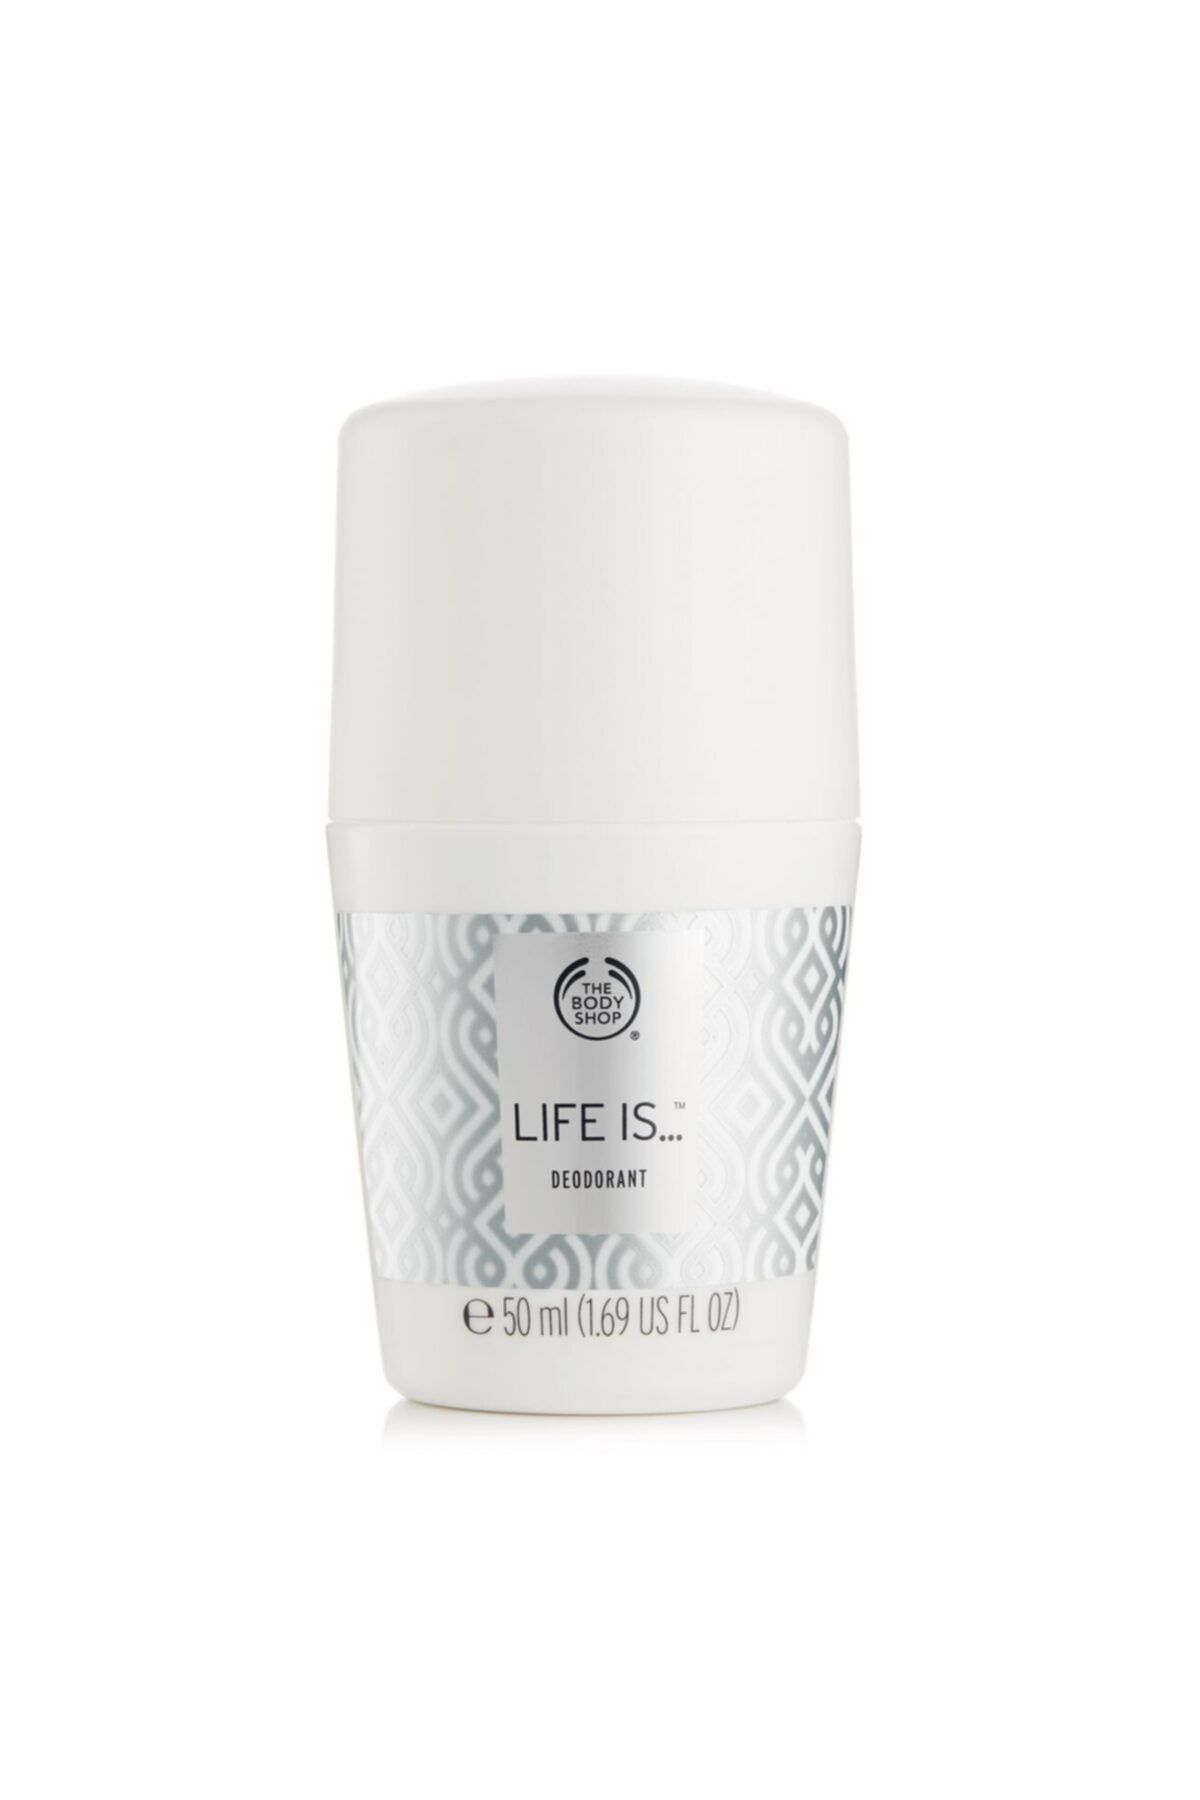 THE BODY SHOP Life Is...™ Roll-on Deodorant 50ml